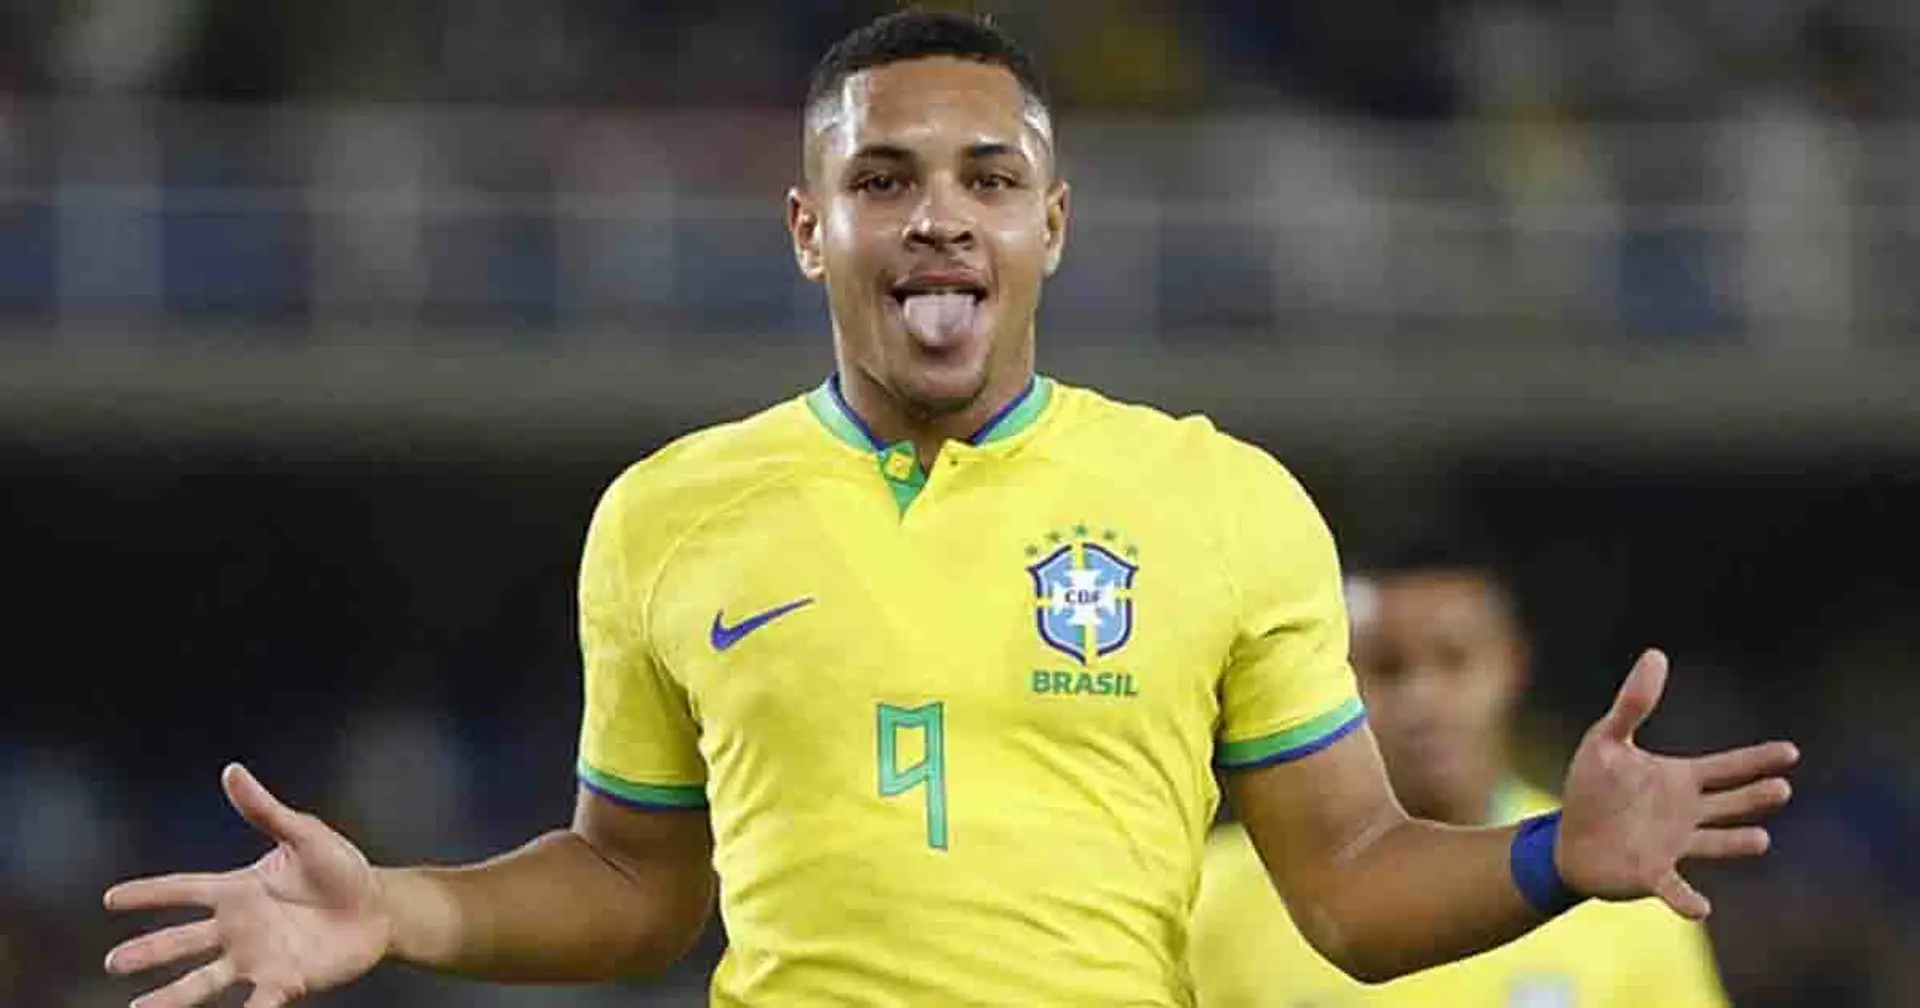 Barca see initial approach for Vitor Roque signing rejected - details revealed (reliability: 5 stars)